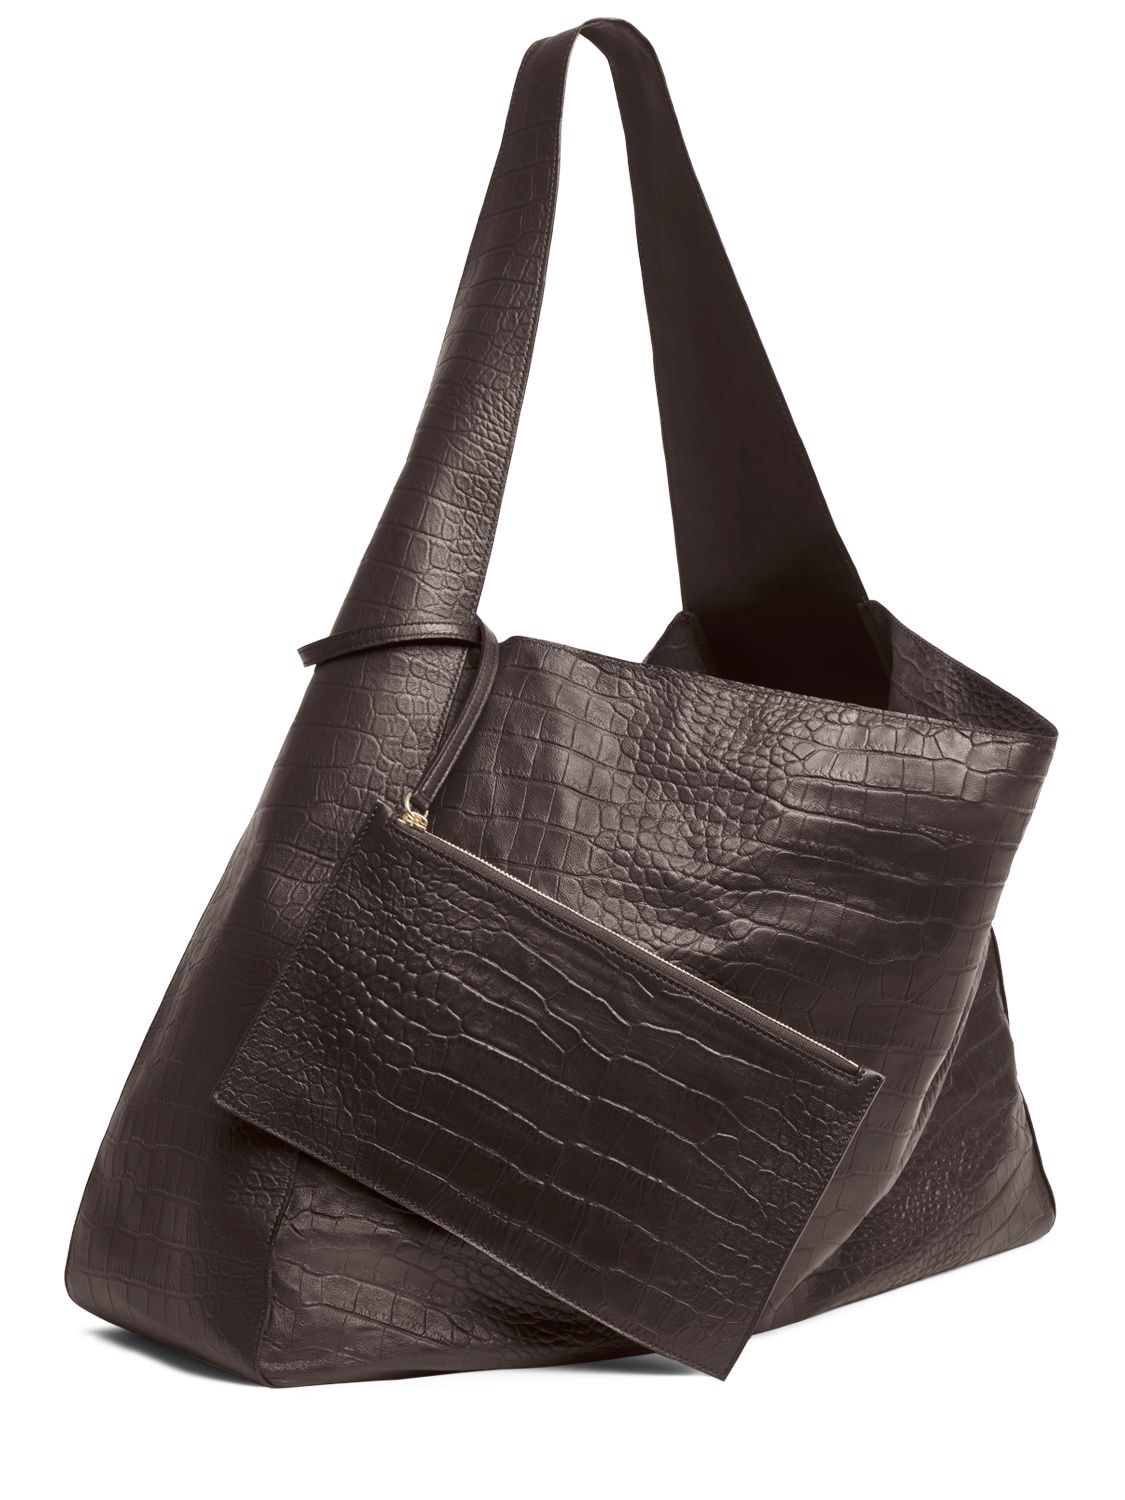 Peter Do Soft Croc Embossed Leather Tote Bag In Brown Croc